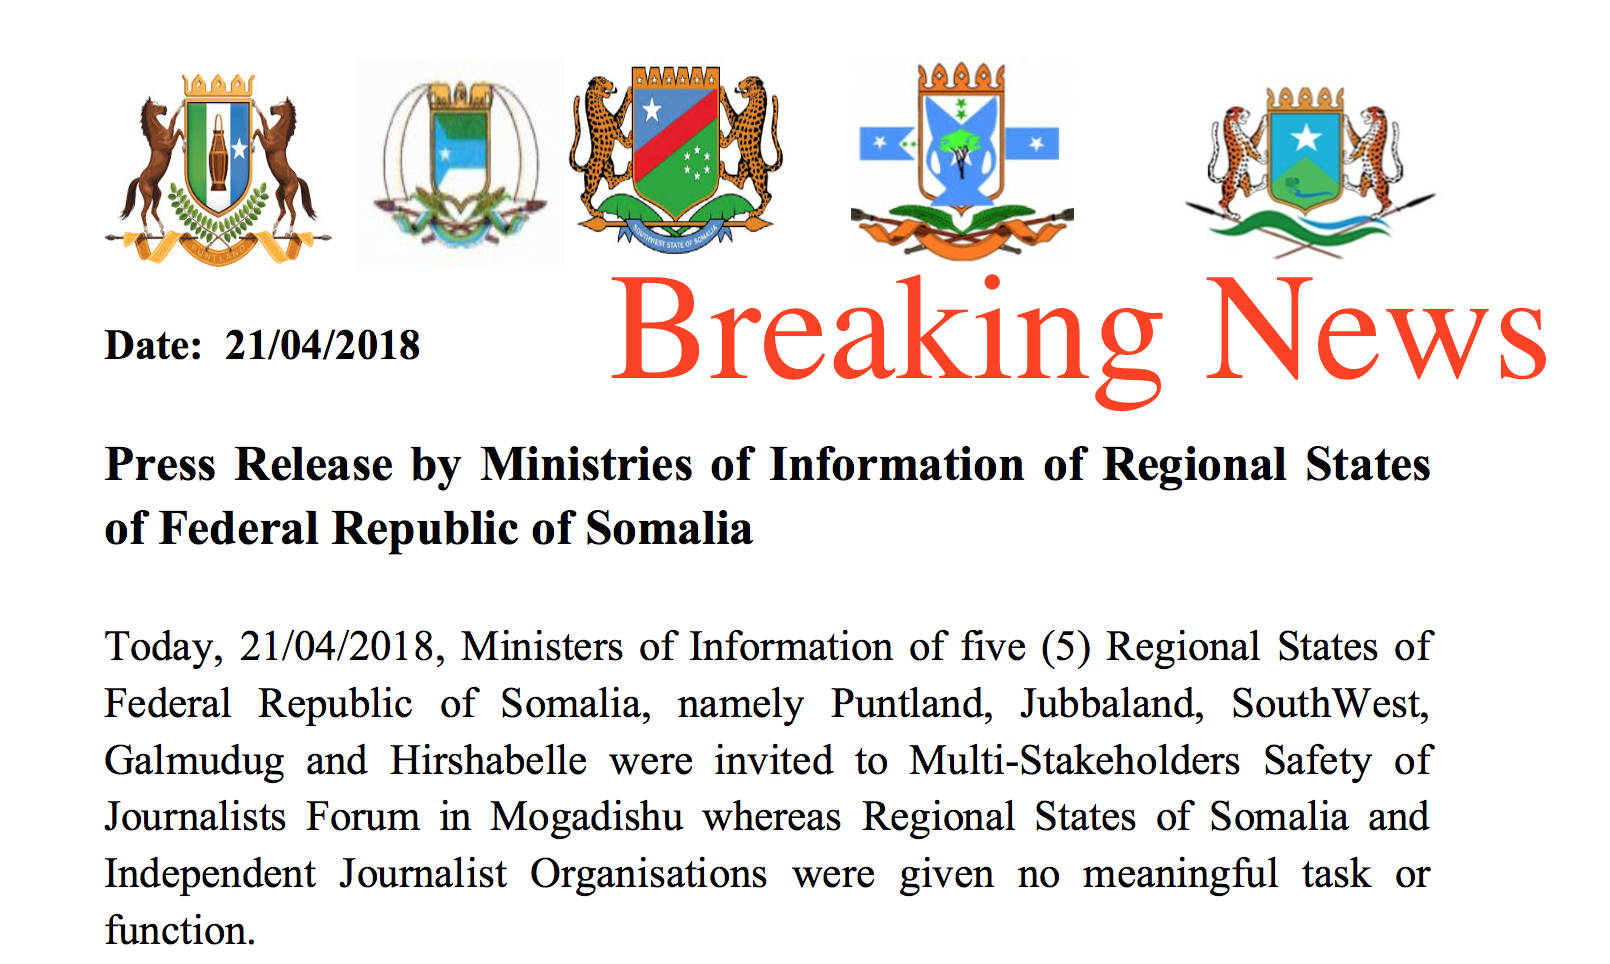 Press Release by Ministries of Information of Regional States of Federal Republic of Somalia